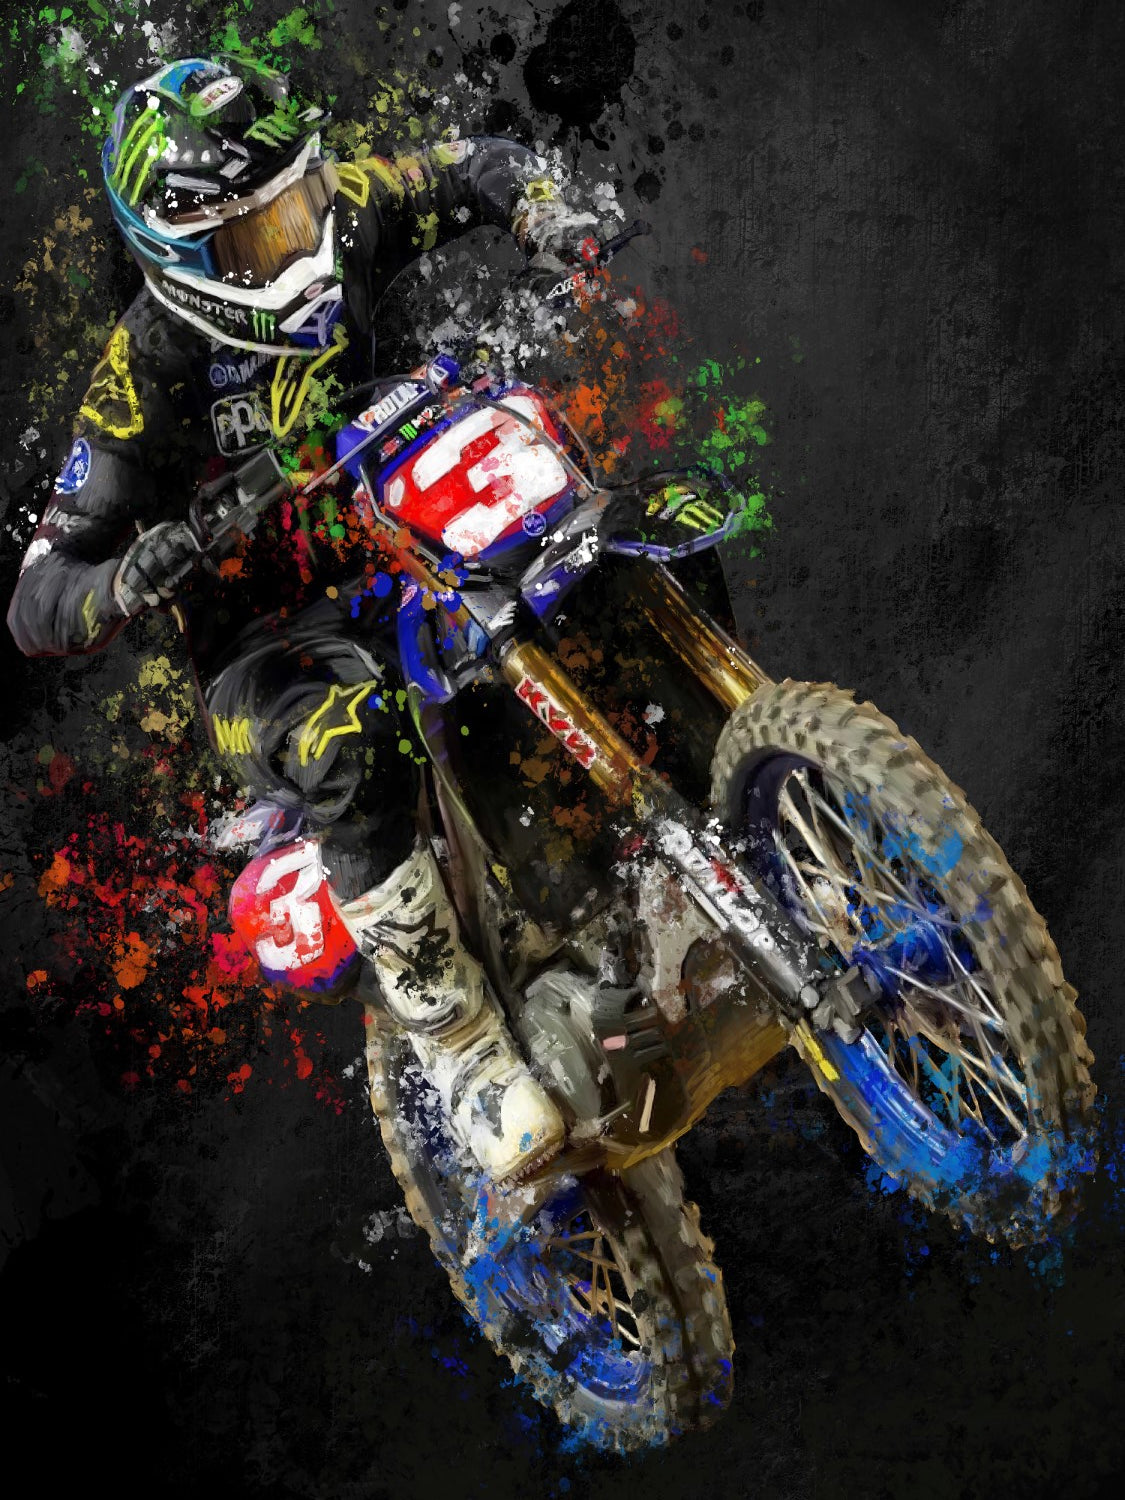 Reigning Supercross Champion and Current Pro Motocross Championship Leader Eli  Tomac Wins First ESPY Award in the Best Athlete Mens Action Sports  Category  Kickin the Tires